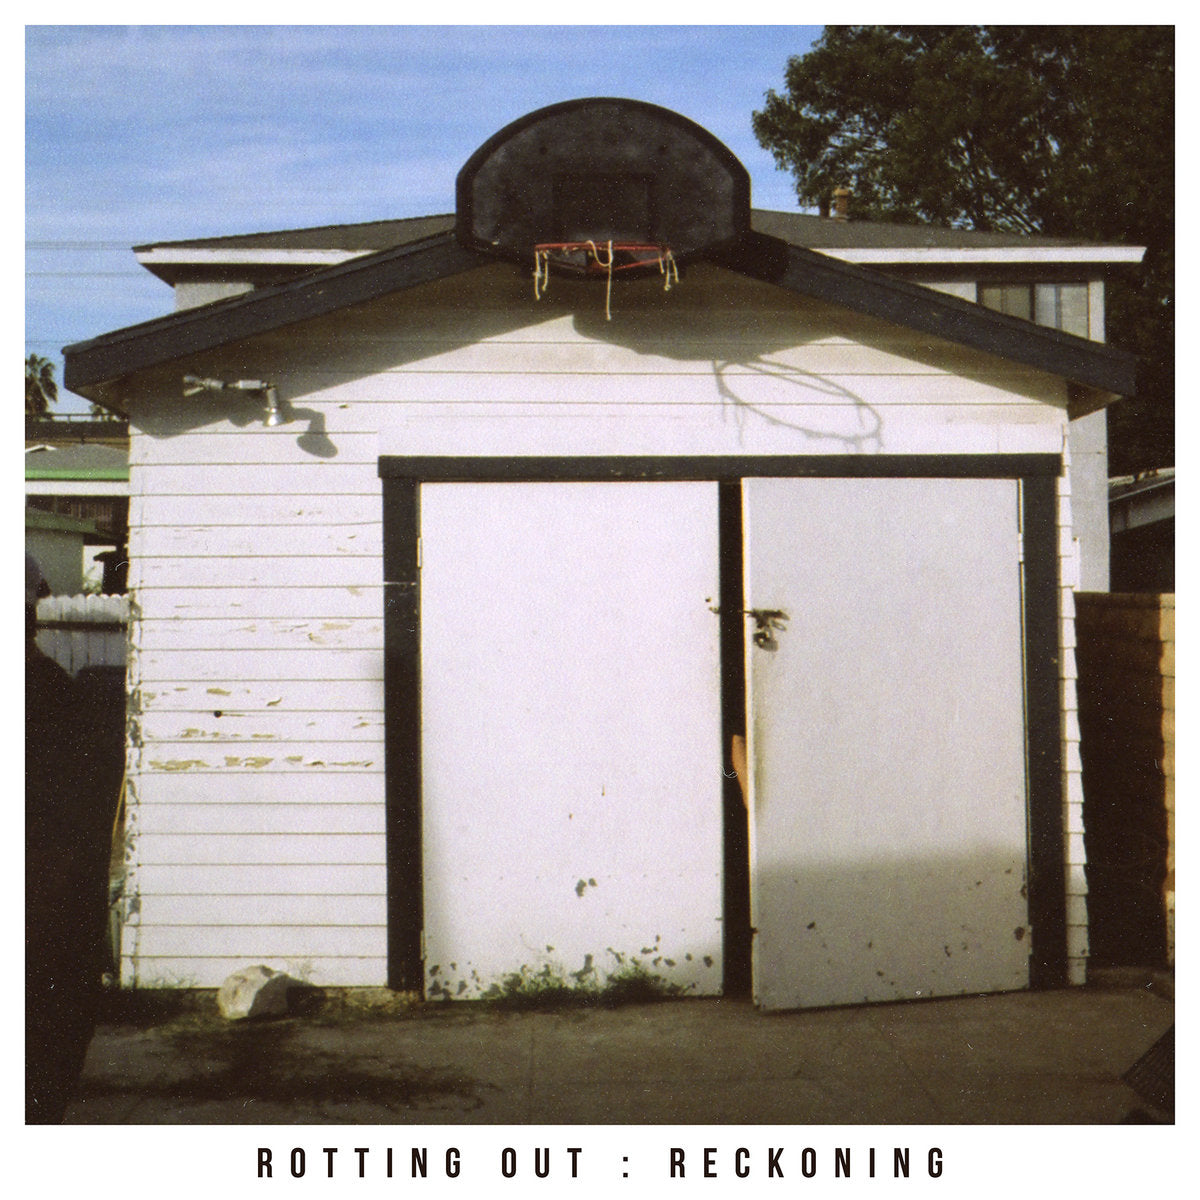 Rotting Out "Reckoning" 12" Vinyl